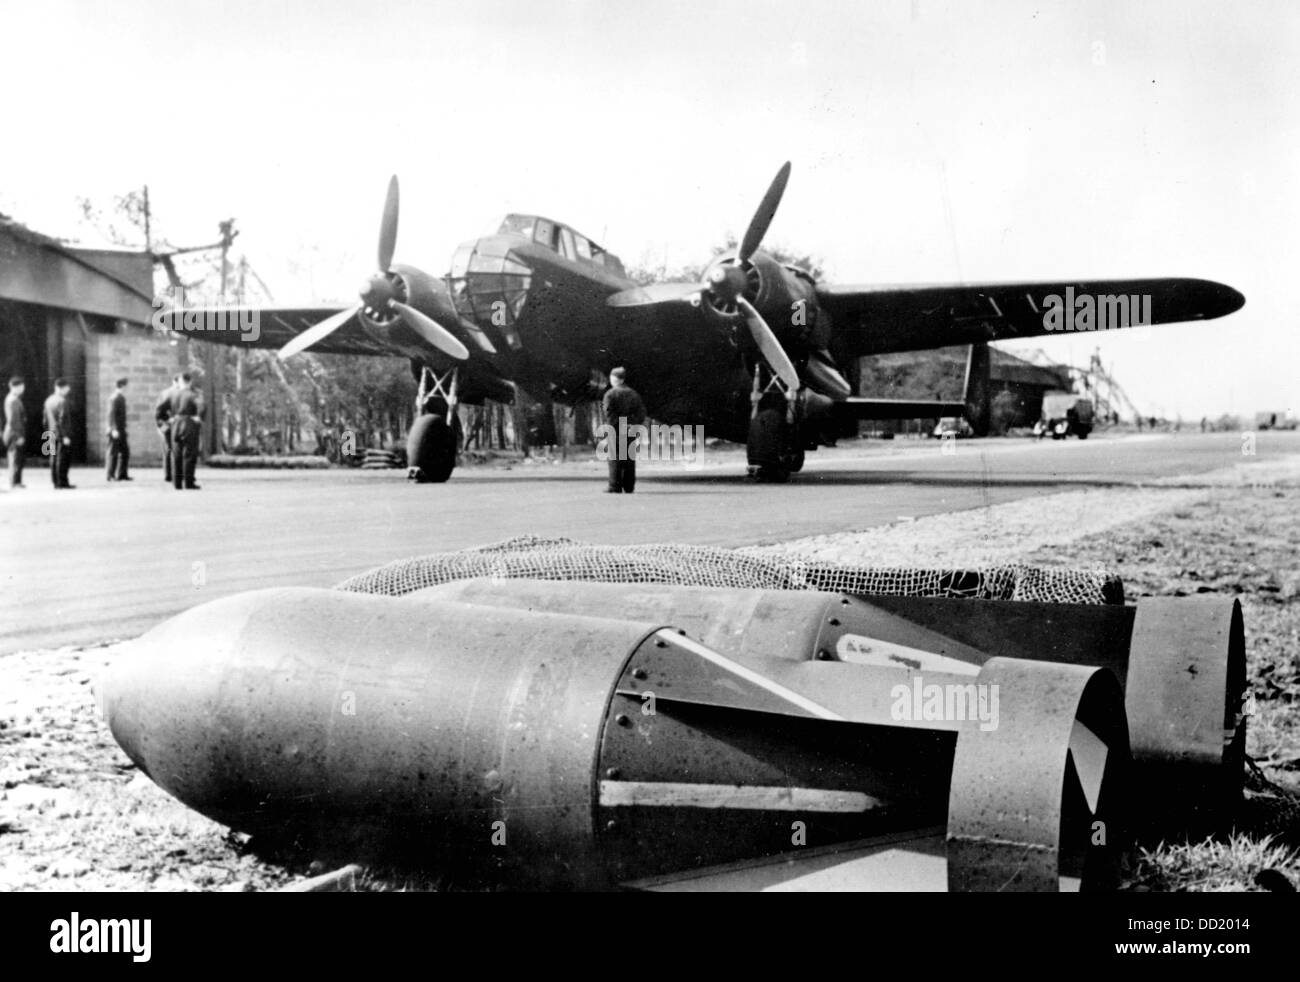 A bomber of the type Do 217 produced by the Dornier Flugzeugwerke (Dornier Aircraft Manufacturer) is prepared for an air raid against England in October 1943. Place unknown. The Nazi Propaganda! on the back of the picture is dated 12 October 1943: 'Do 217 against England. The Supreme High Command of the Armed Forces revealed that air raids of our Air Force against military targets in England, also in the area around London, took place recently. - Our image shows a heavy bomber Do 217 ready for take-off. In the foreground several heavy bombs.' Fotoarchiv für Zeitgeschichte Stock Photo